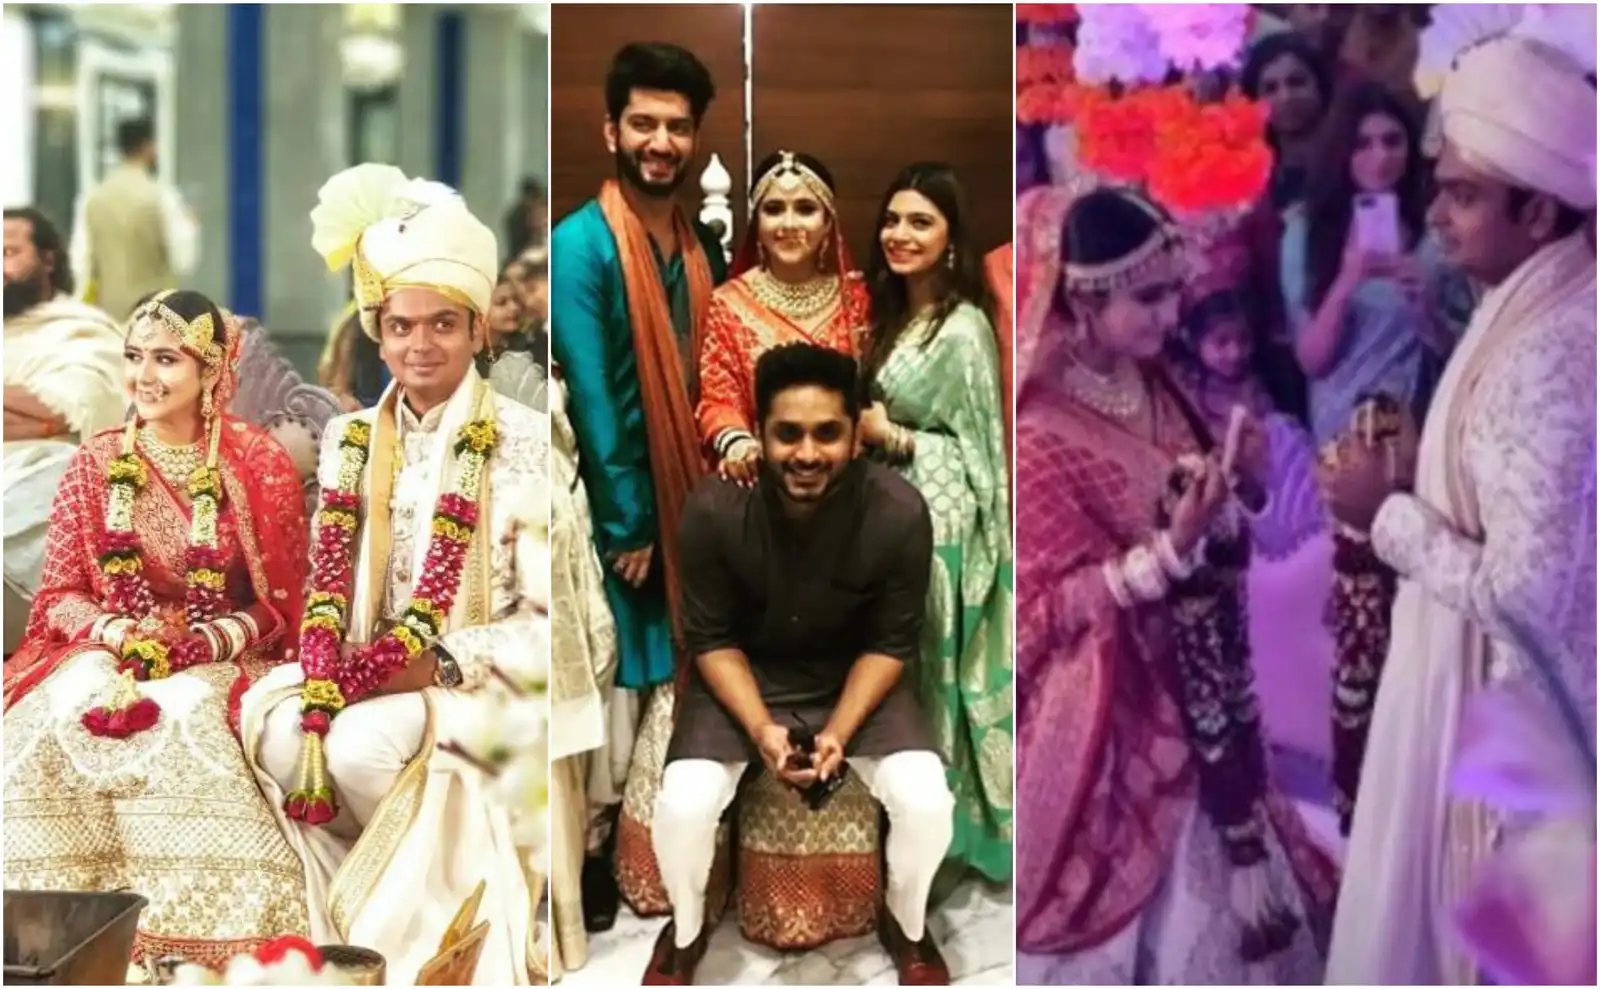 The Buddy Project Actress Palak Jain And Tapasvi Mehta's Marriage Pictures Will Truly Melt Your Hearts